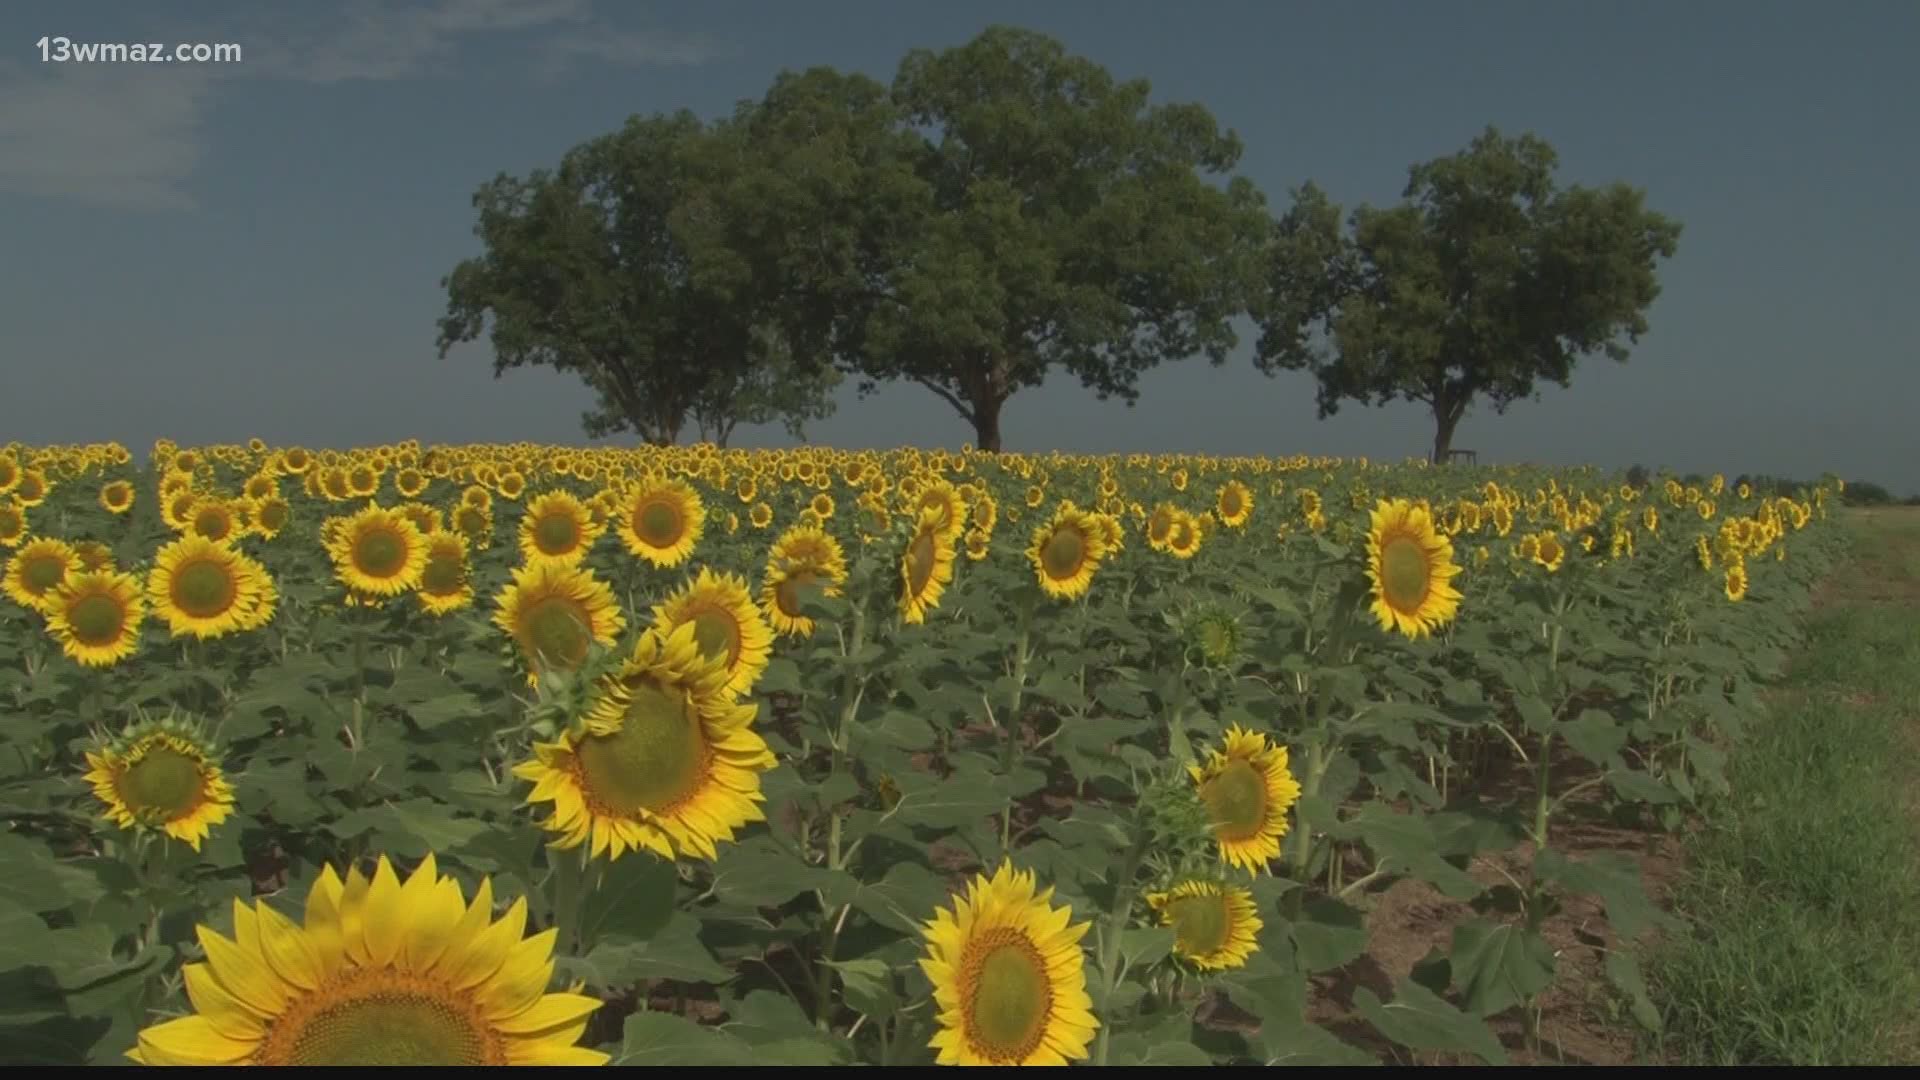 Much of Wilcox County is rural land out in the country, and this weekend, you can immerse yourself in a sunflower field.